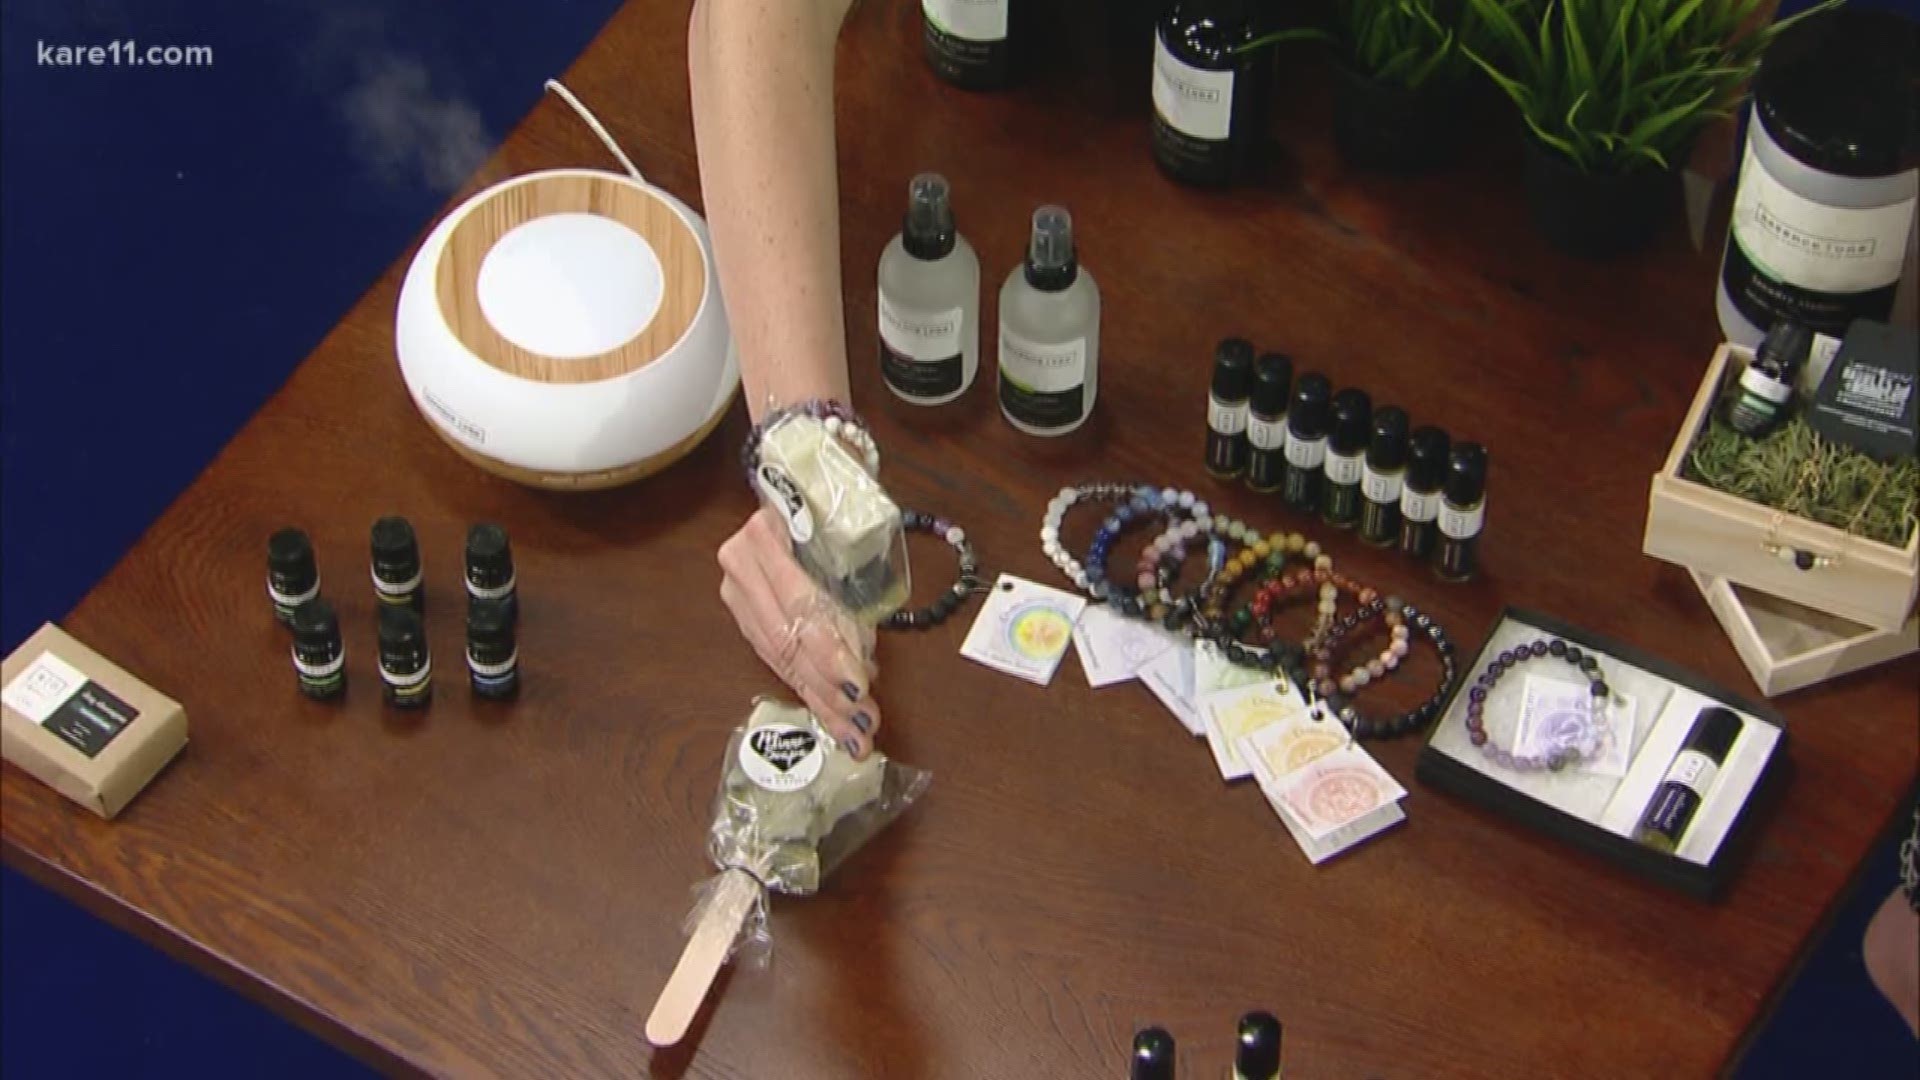 Essential oils can be just the thing some of us need to de-stress. One local company is making oil blends that are state fair themed.